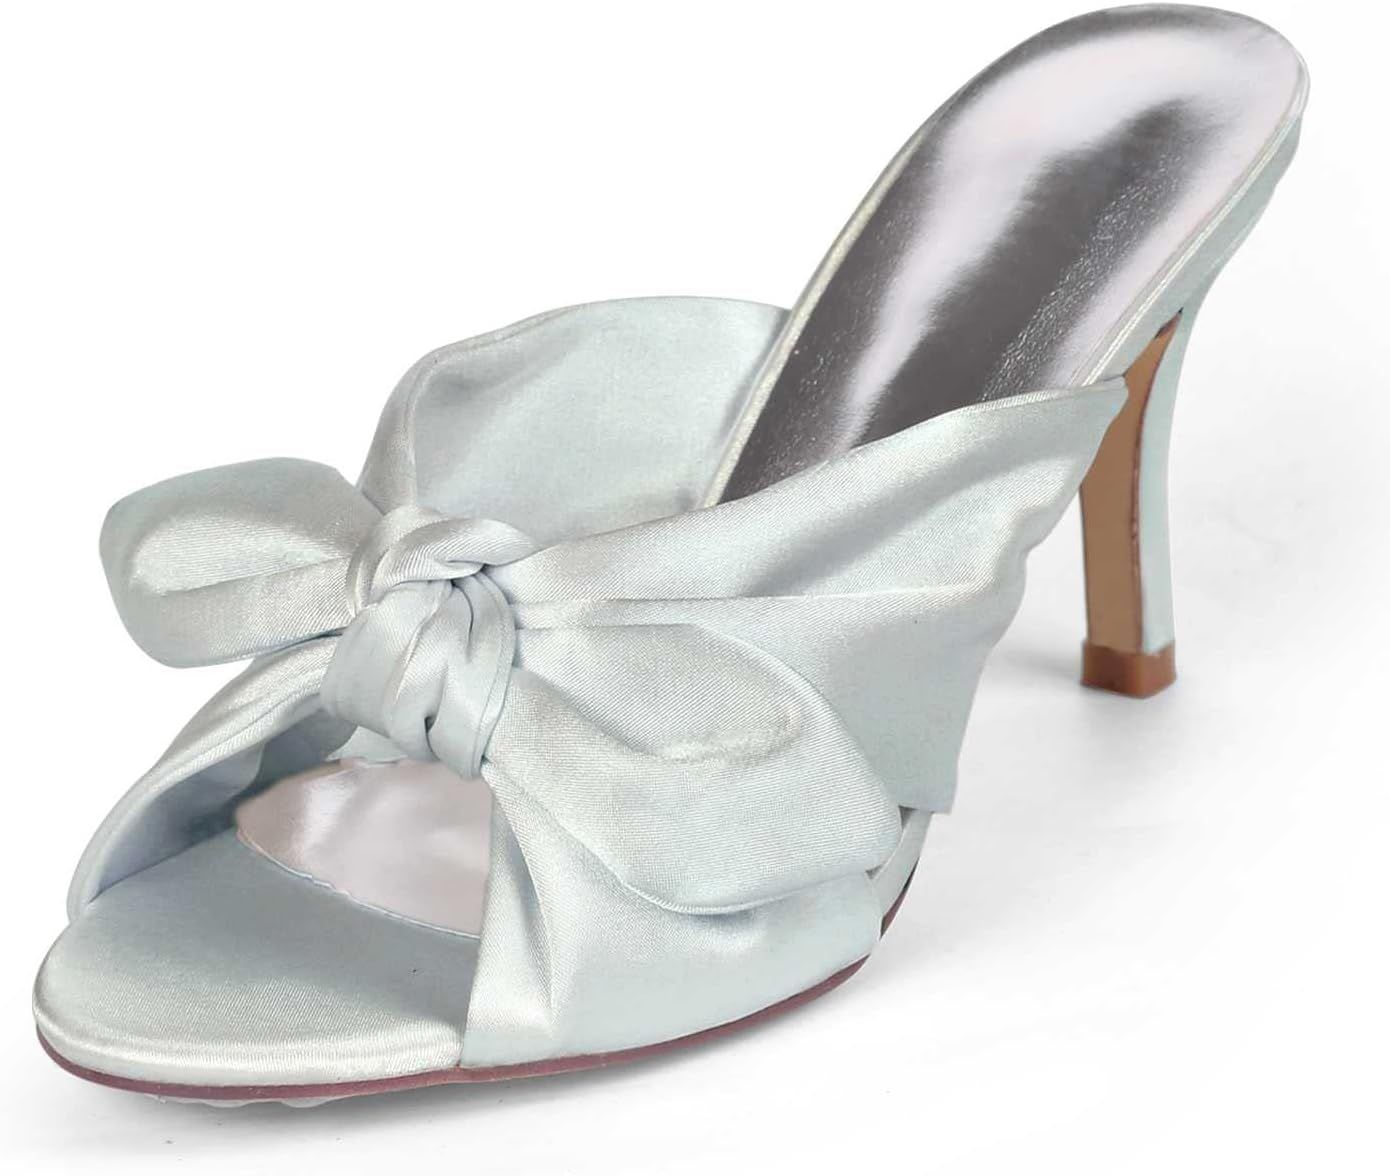 GJHJ Bridal Satin Low Heel Closed Toe Prom Party Dance Wedding Shoes Wommen Pumps | Amazon (US)